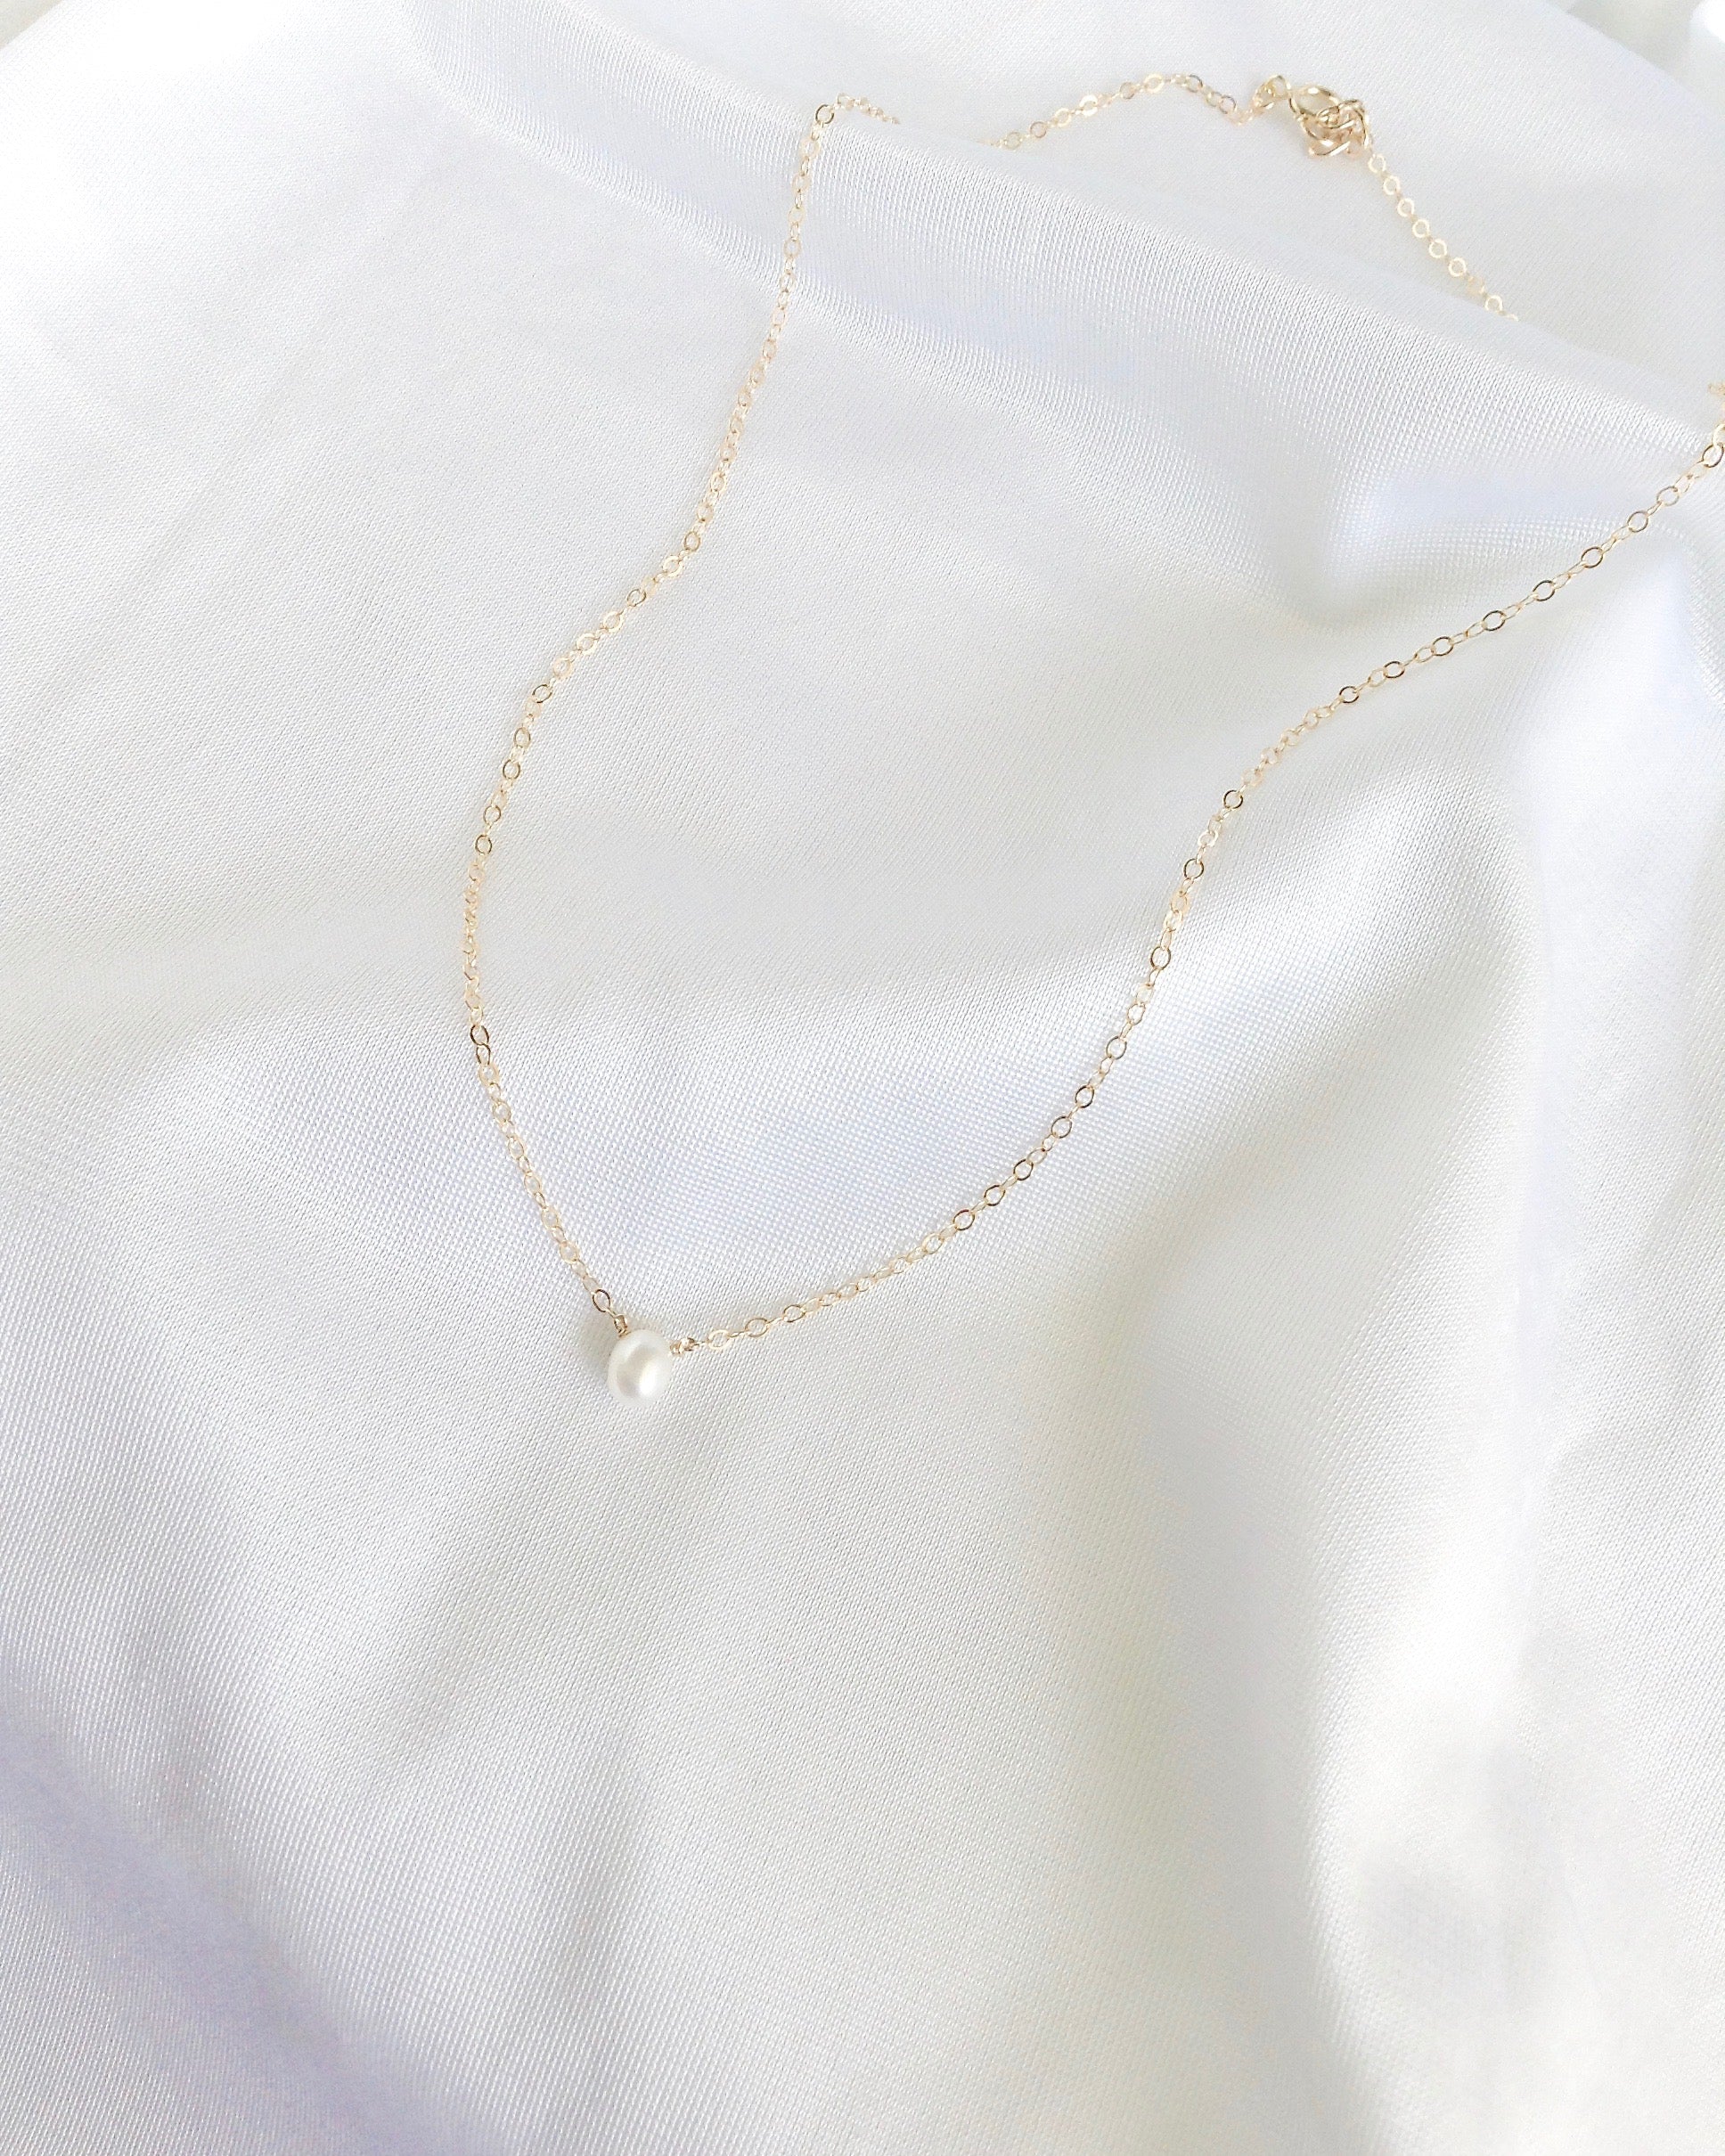 Dainty Pearl Choker Necklace | Real Pearl Choker in Gold Filled or Sterling Silver | IB Jewelry